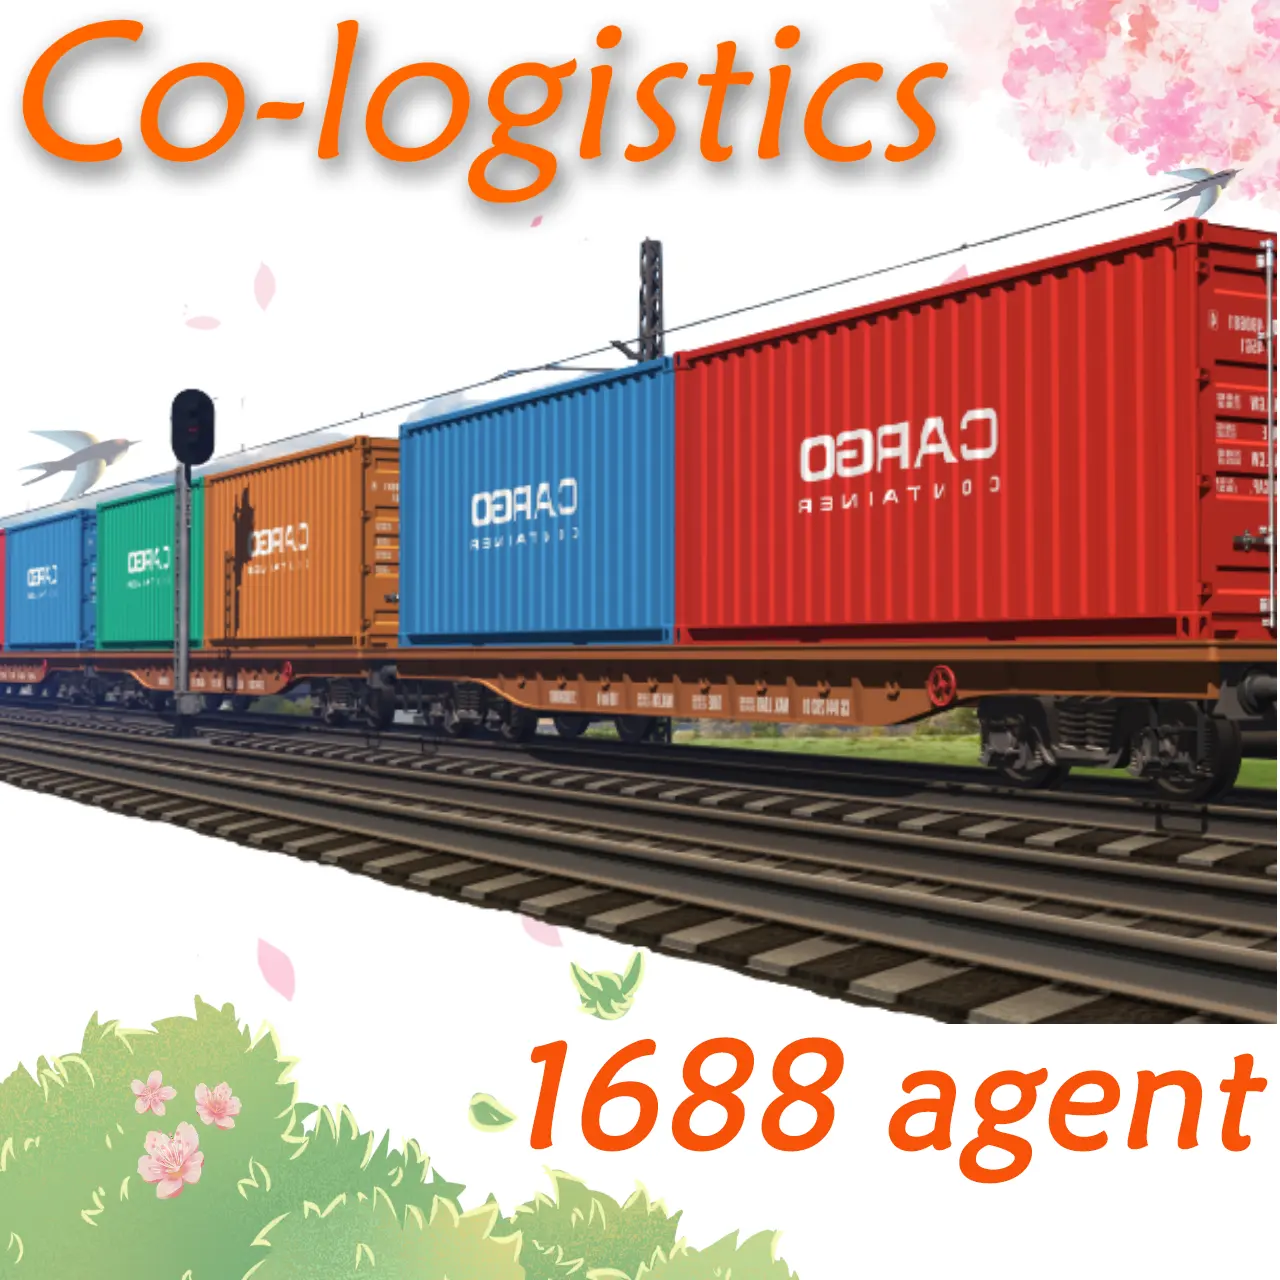 Railway DDP Railway Freight Agent From China To UK By Train Shenzhen Guangzhou Freight Forwarder To The World